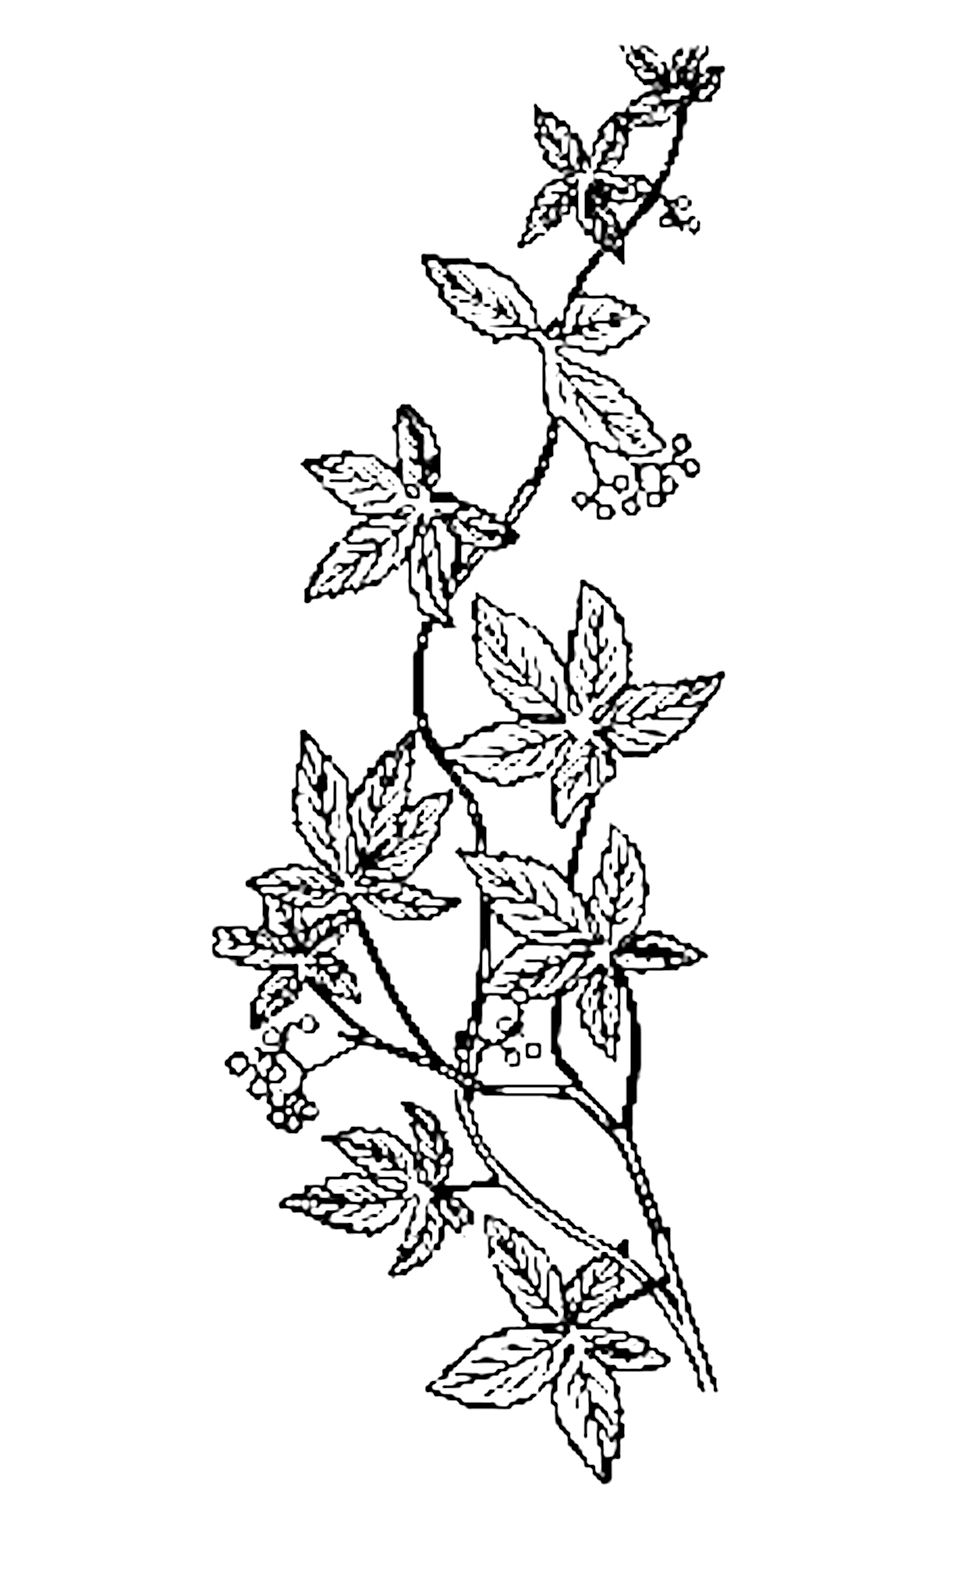 free black and white floral clip art - photo #22